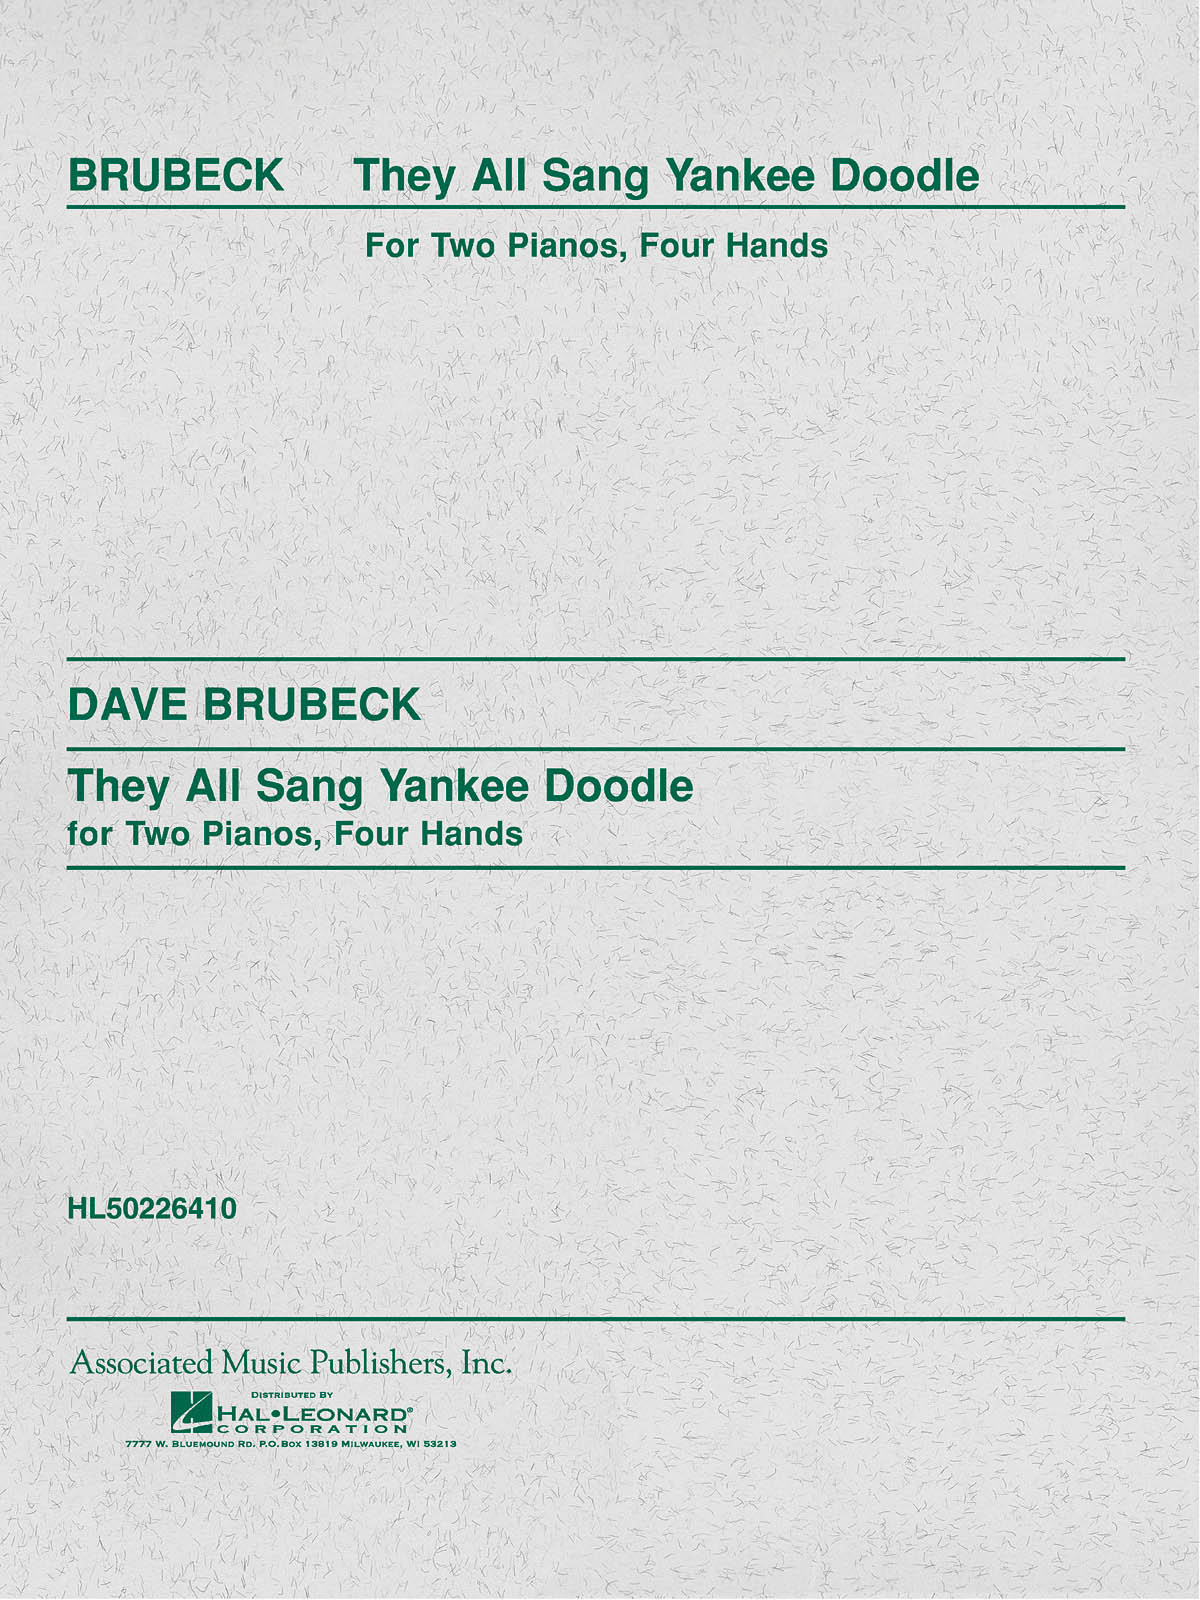 Dave Brubeck: They All Sang Yankee Doodle (Two Pianos)